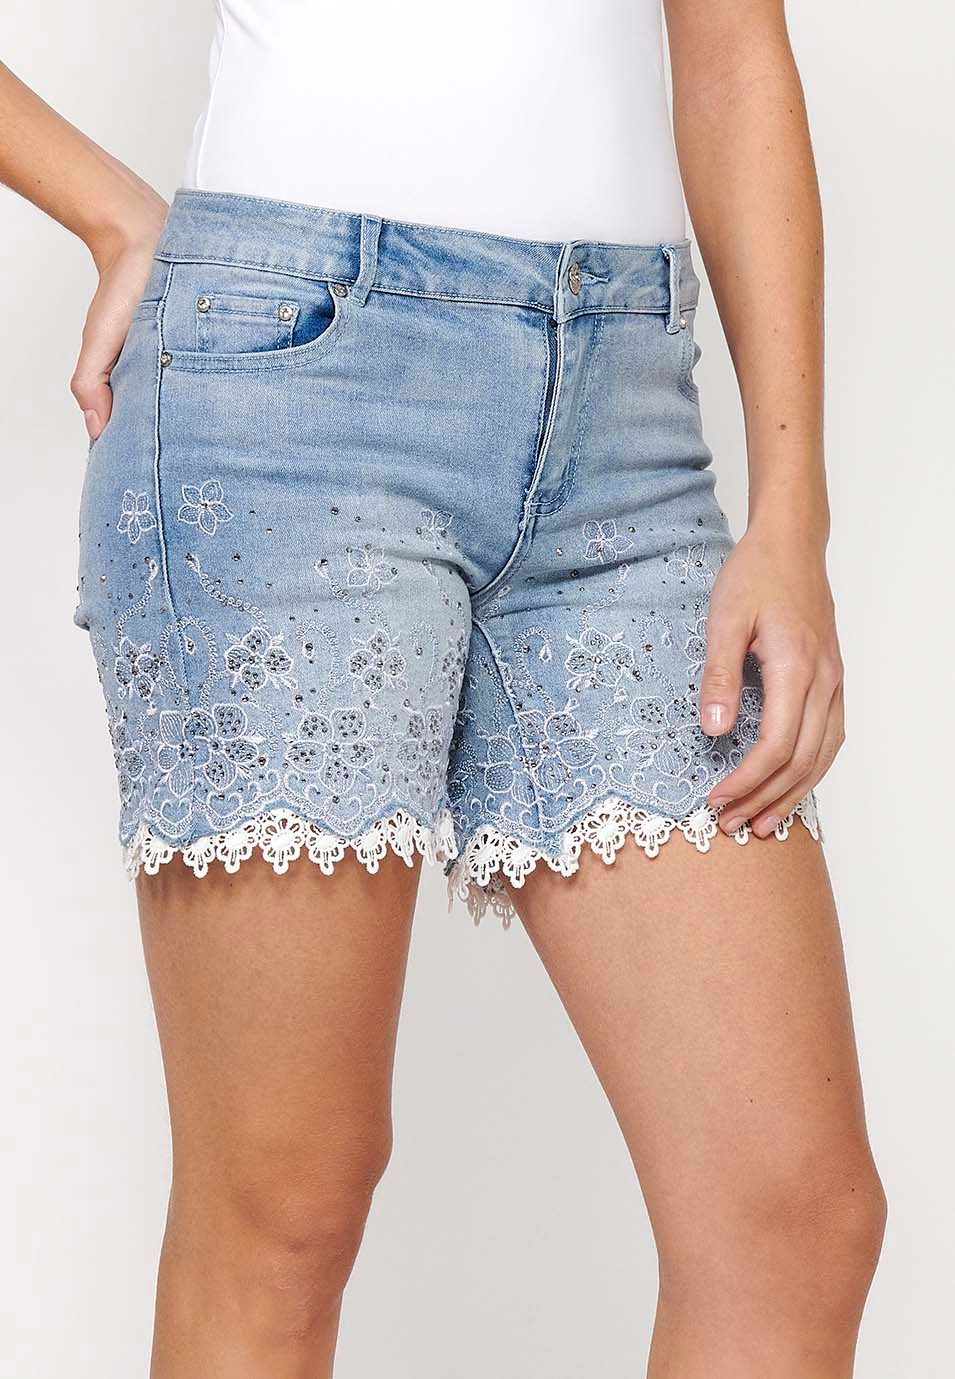 Short denim shorts finished with lace and floral embroidery with front closure with zipper and button with removable bow detail in Blue for Women 3